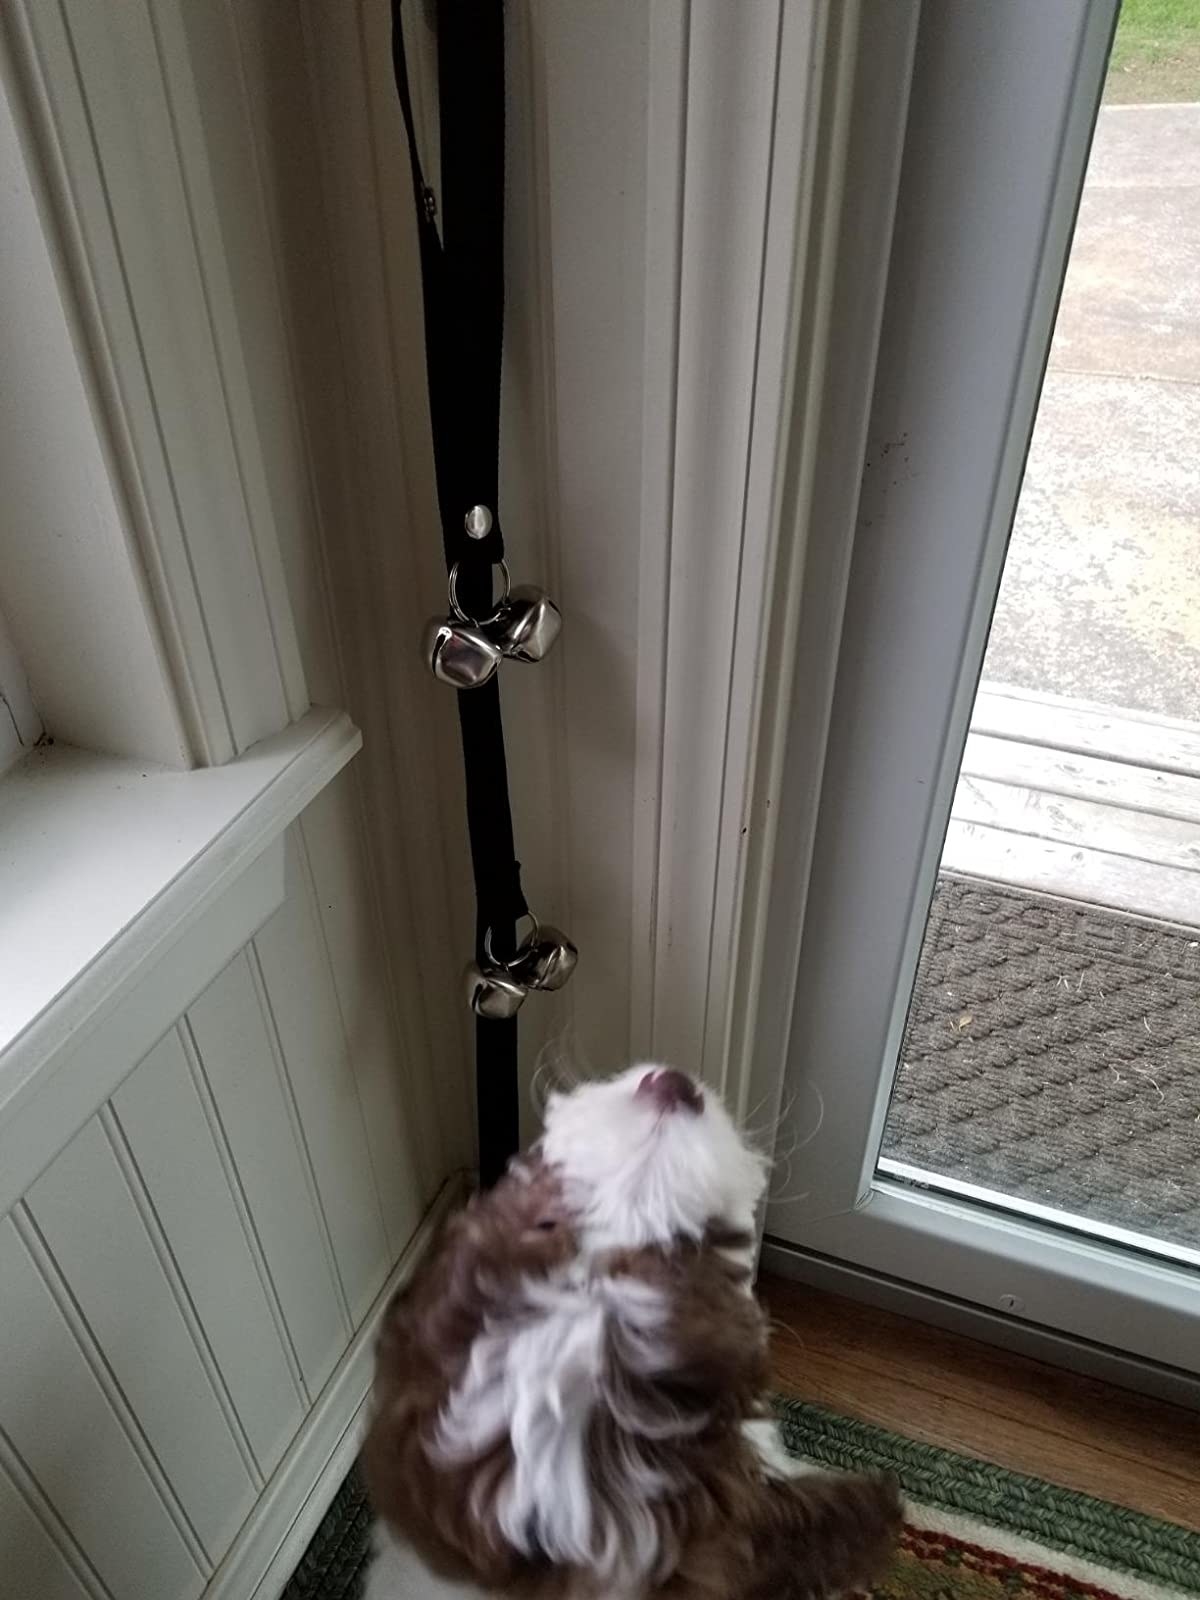 A dog sitting next to a door with the bells